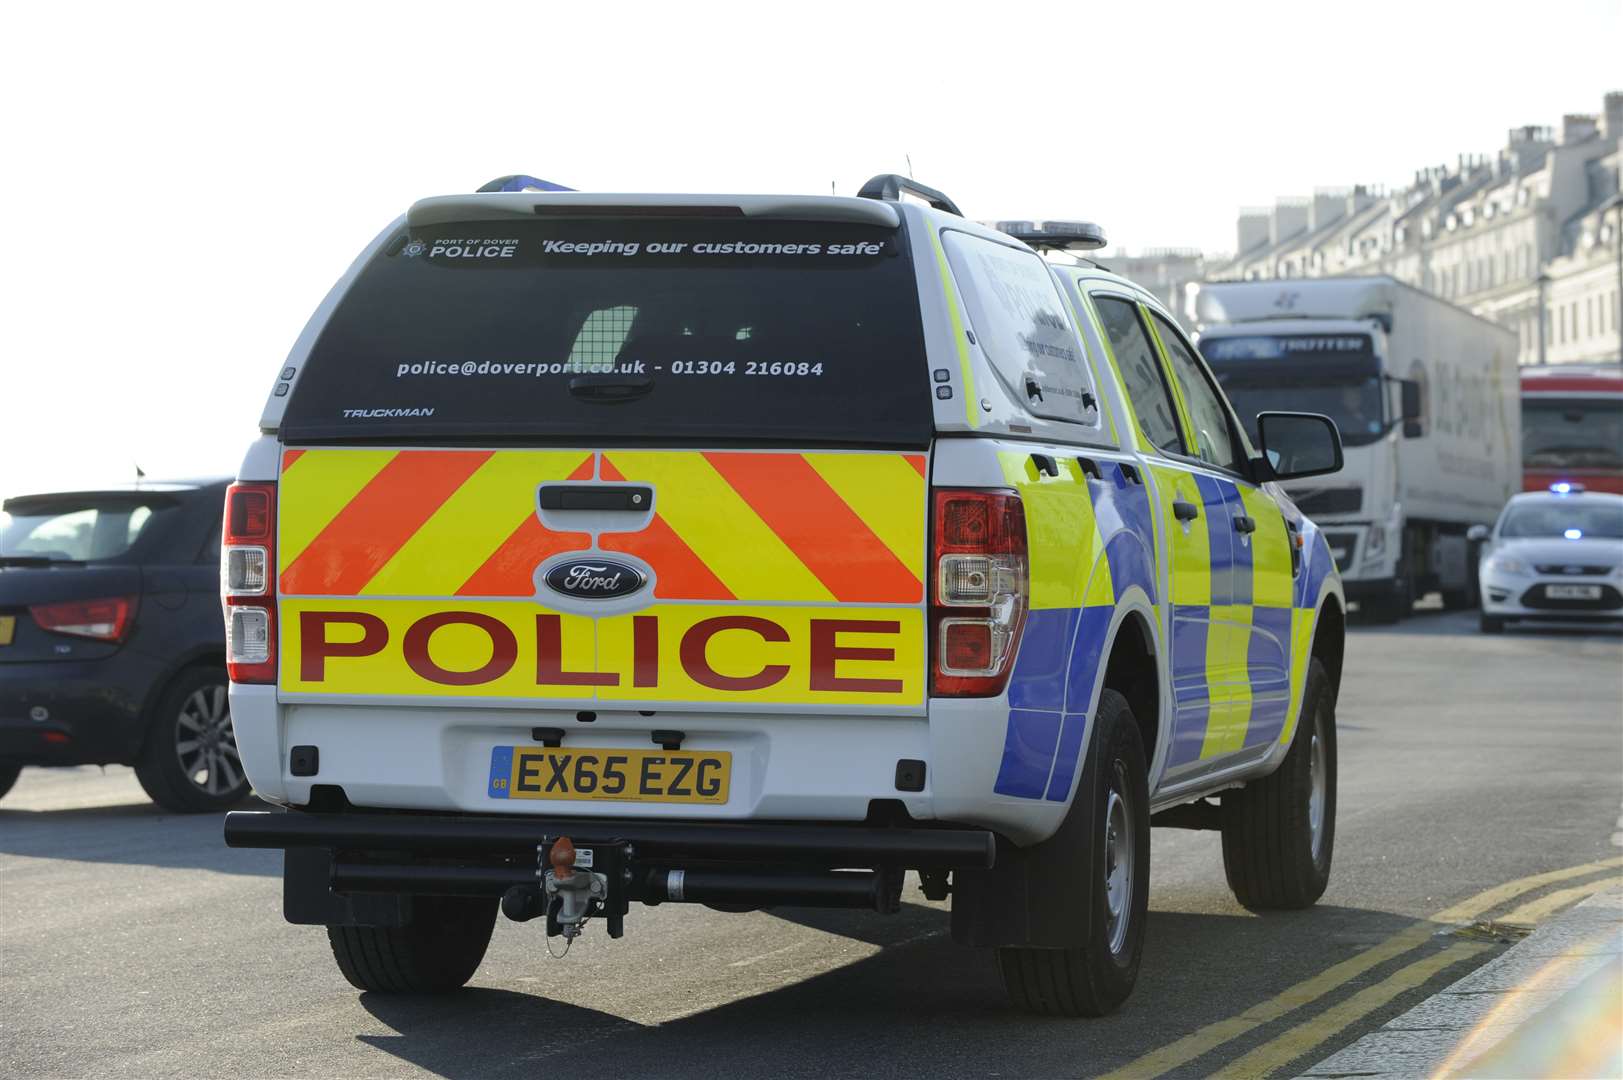 The police stopped four motorists this morning on the A20 stretch into Dover